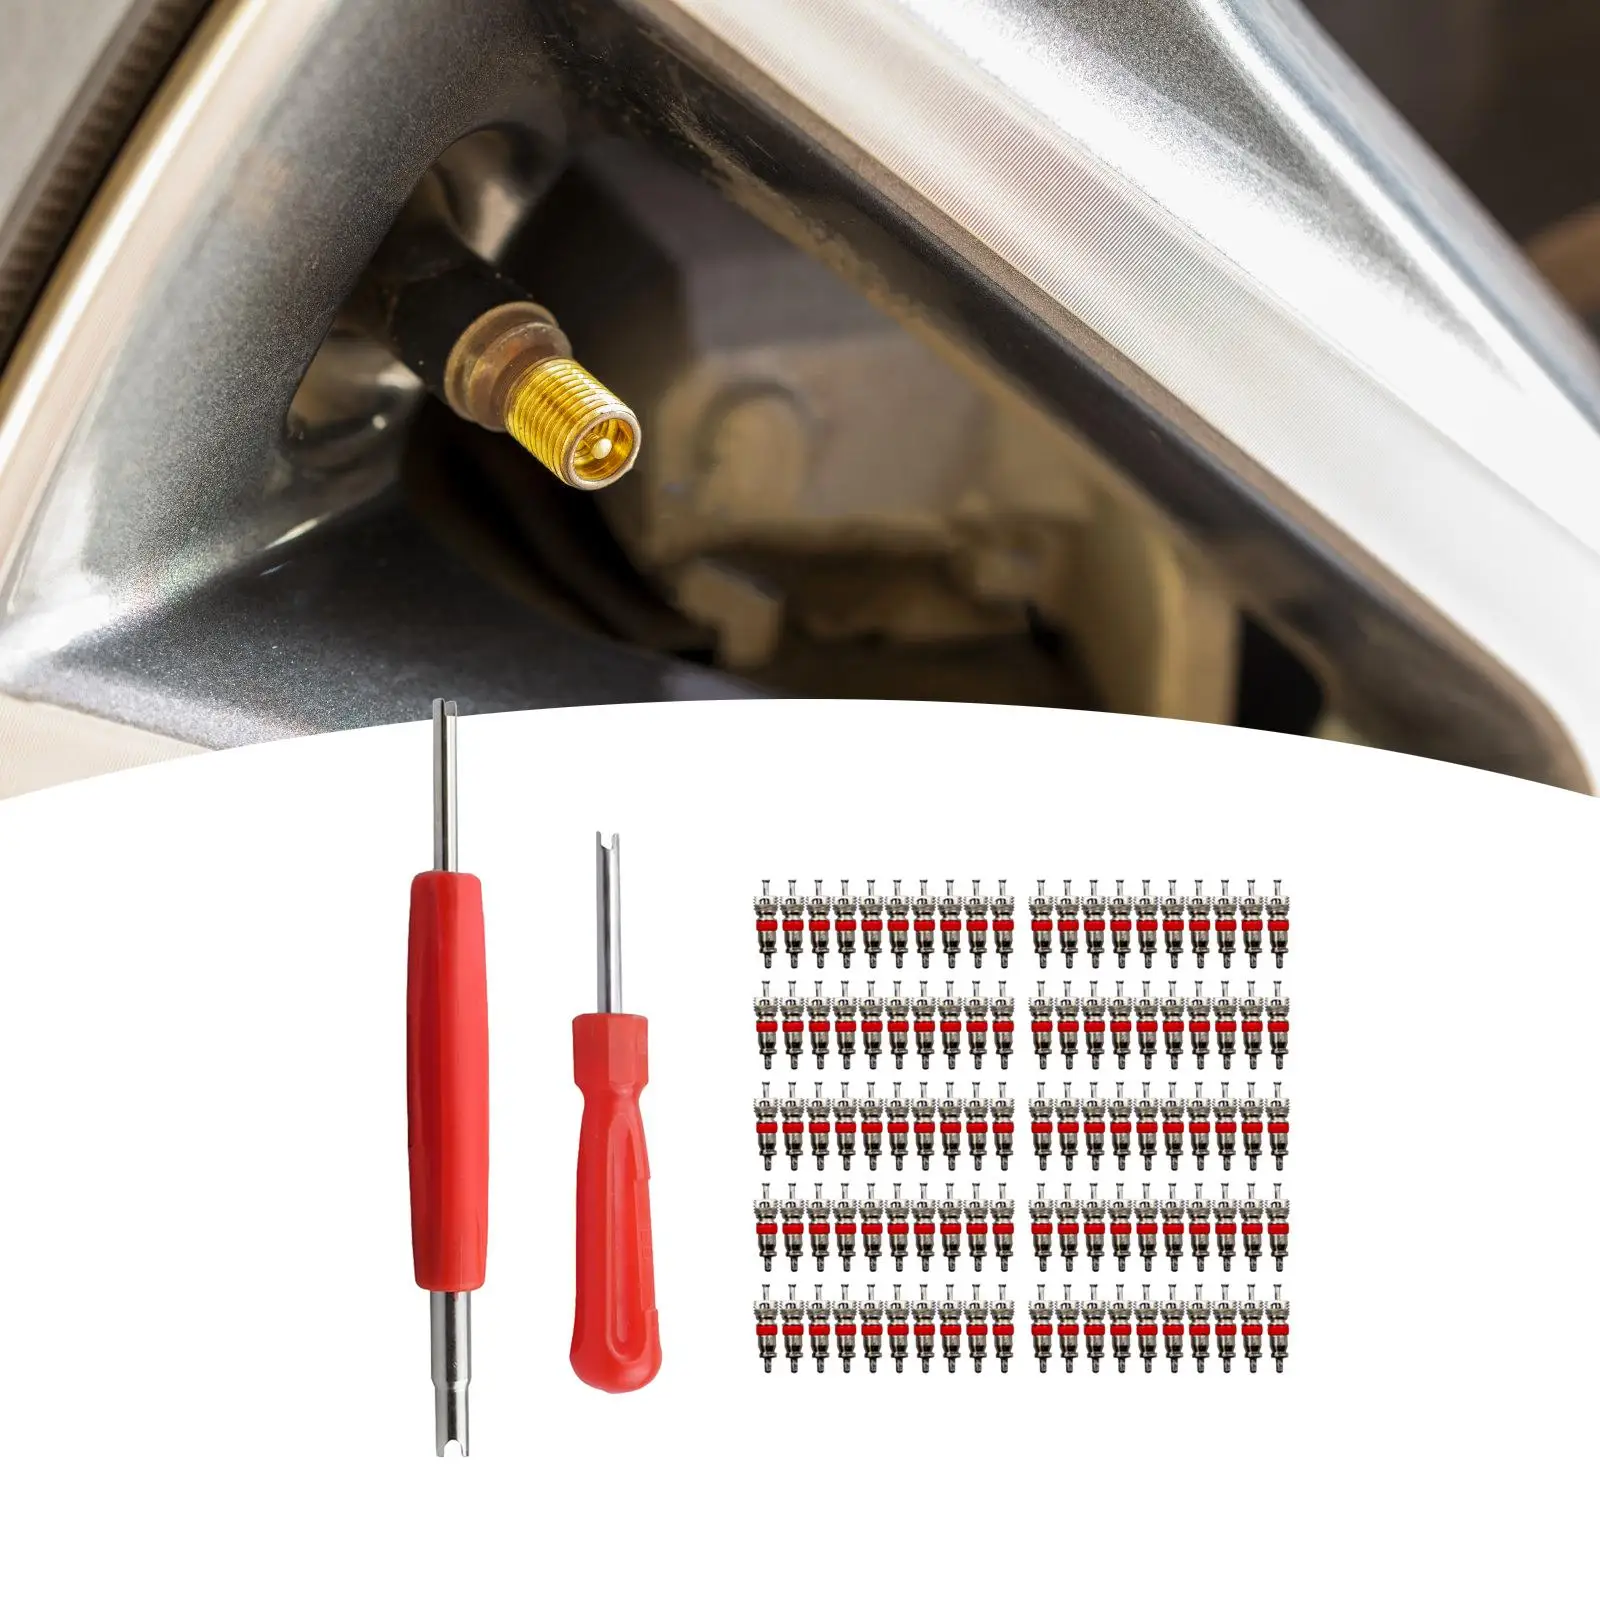 Tire Repair Tool Set Tire Tyre Valve Stem Core for Convenient Installation Stable Performance Vehicle Repair Parts durable